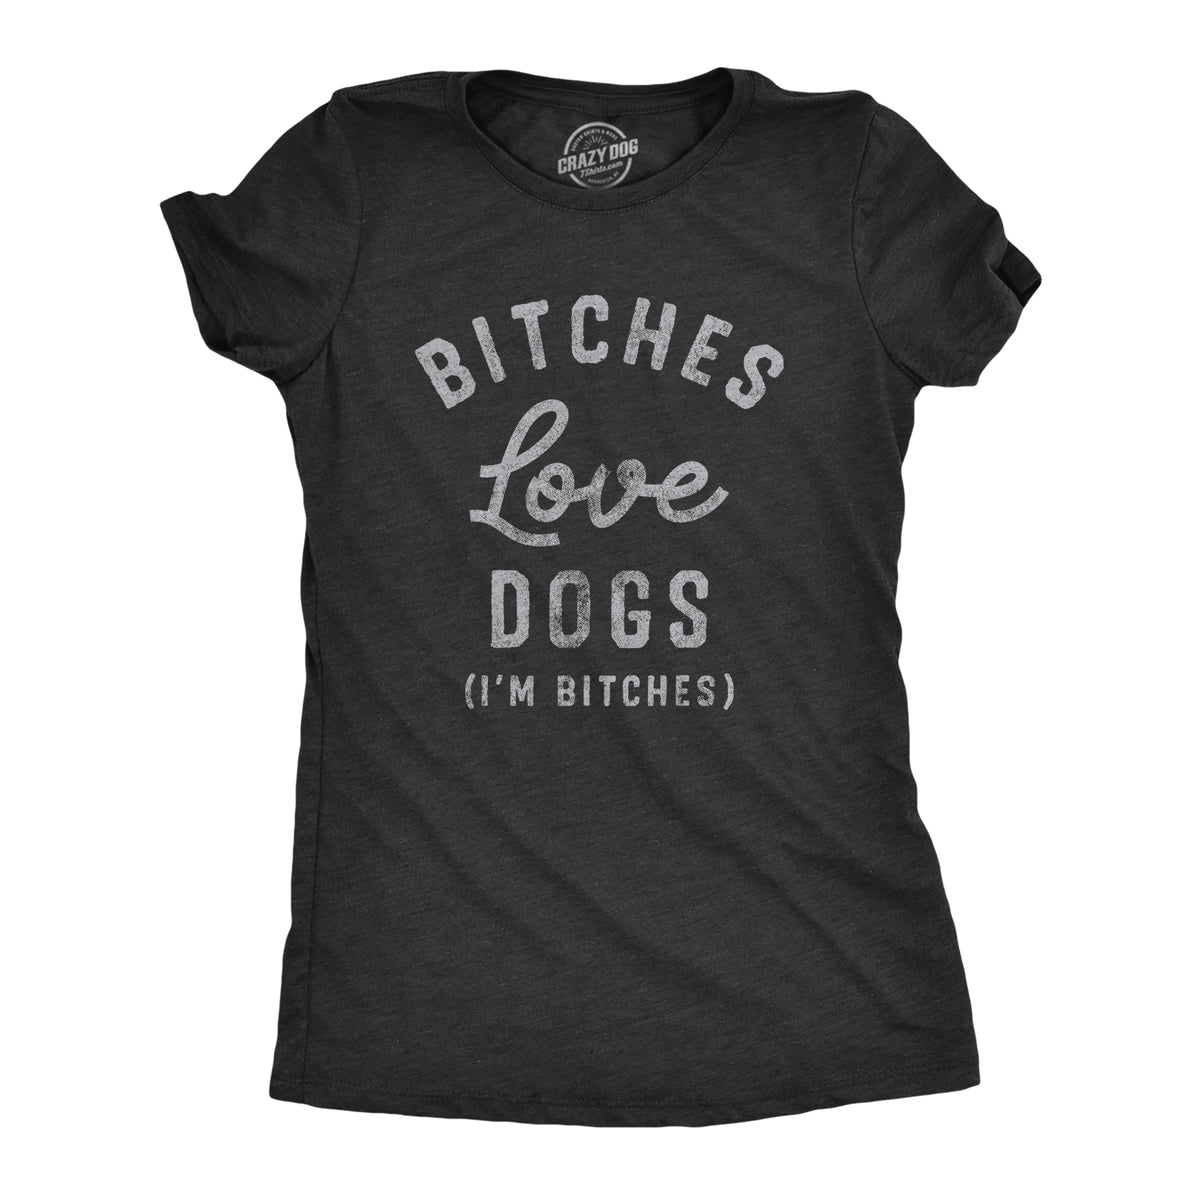 Funny Heather Black Bitches Love Dogs Womens T Shirt Nerdy Dogs Tee